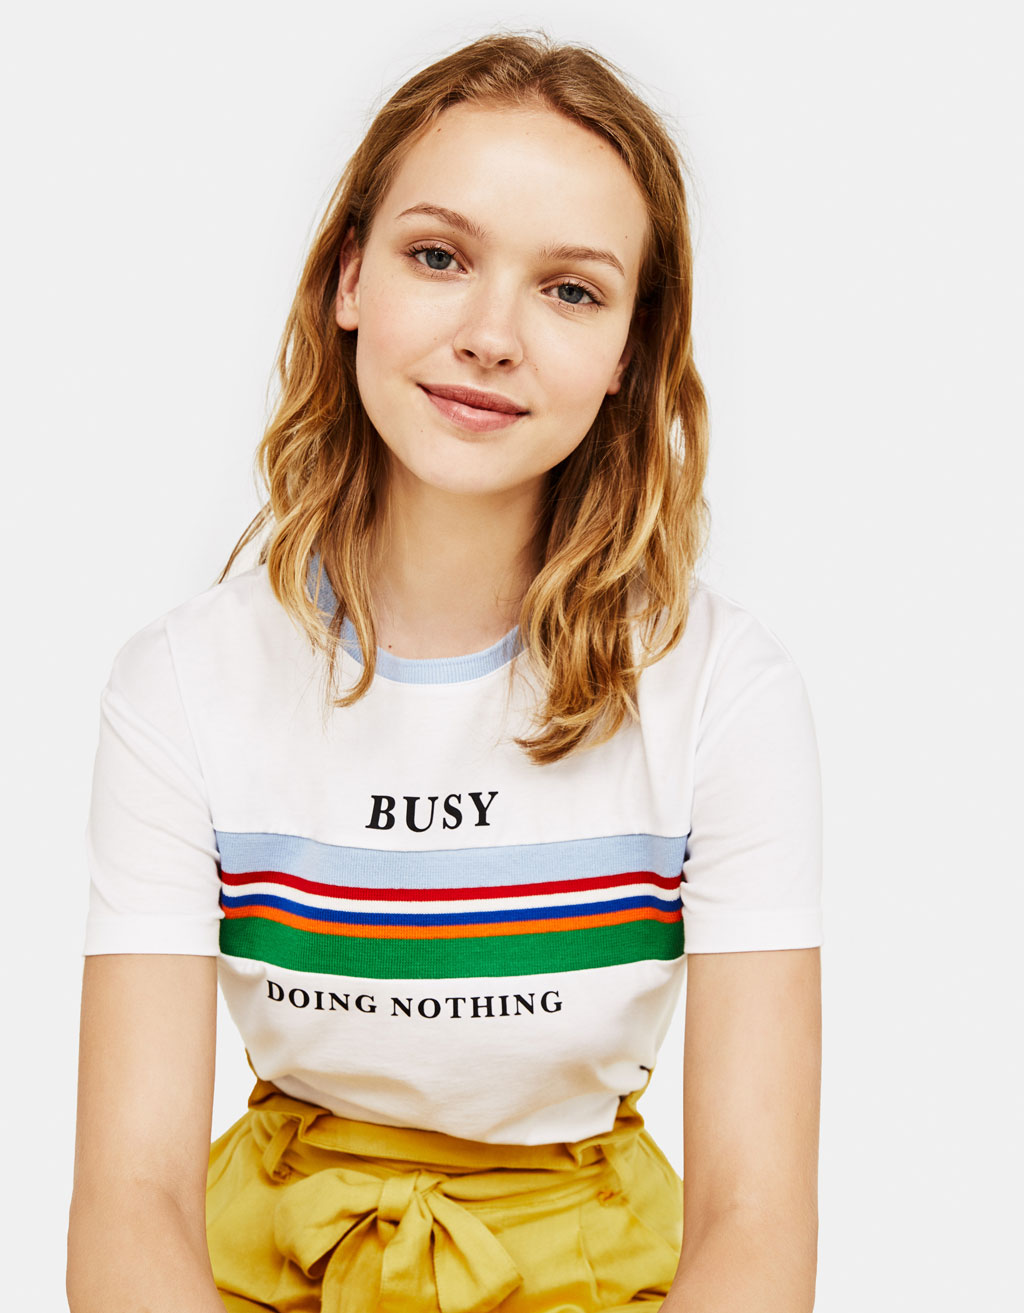 Trendy by Tyana 2: Cute Berskha T-shirts to Buy - Part I